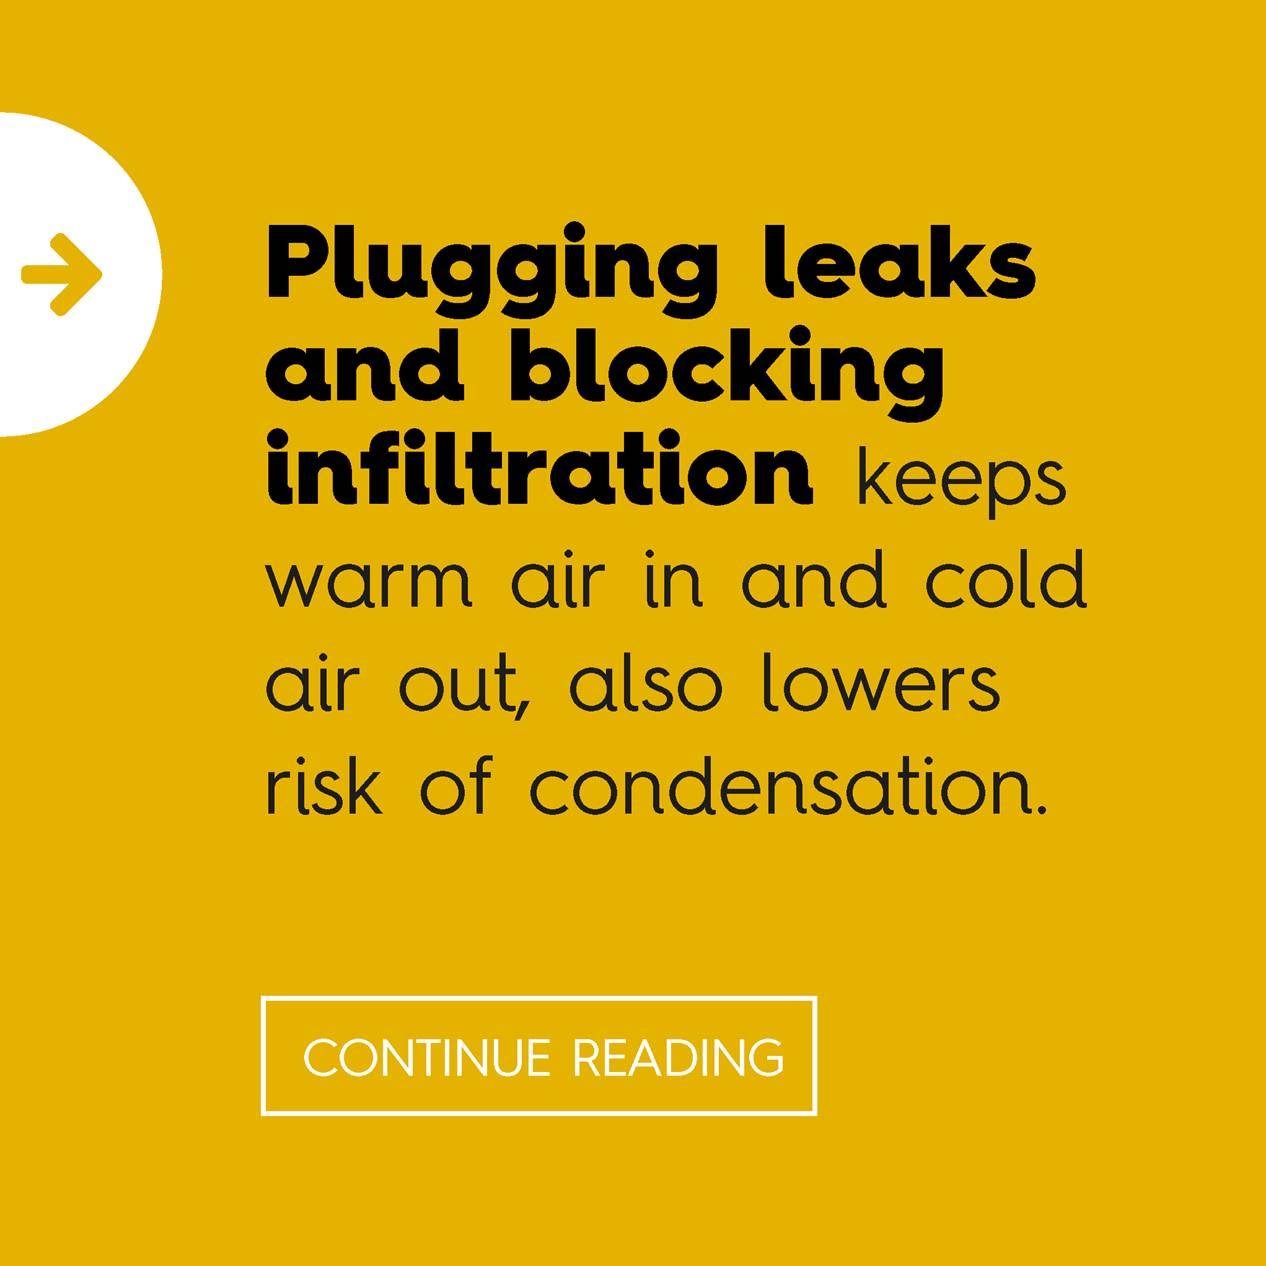 Plugging leaks and blocking infiltration